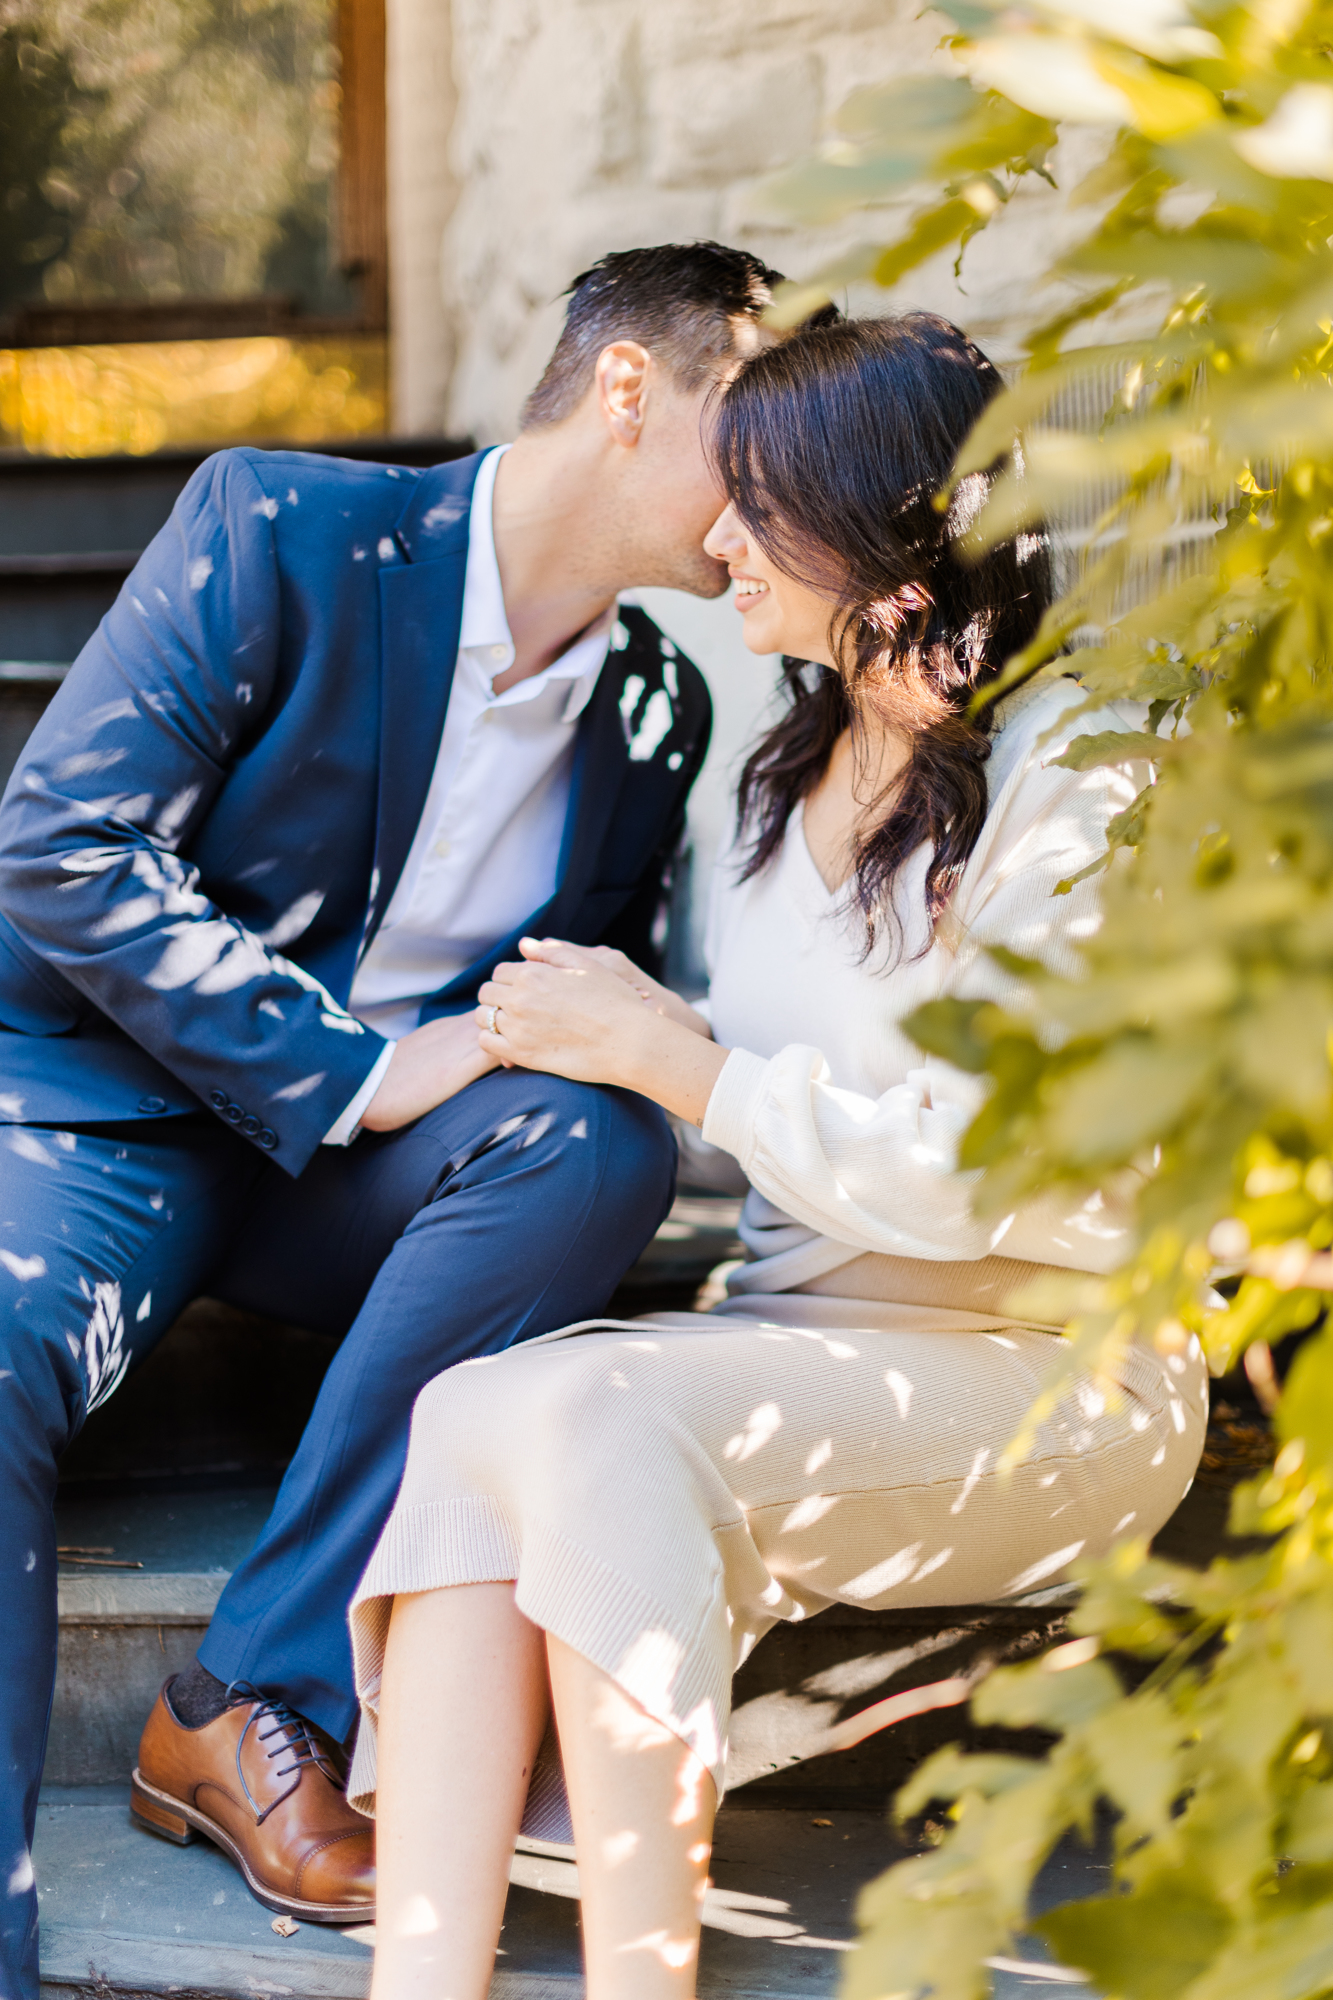 Joyous Upper West Side Engagement Photo Shoot in NYC